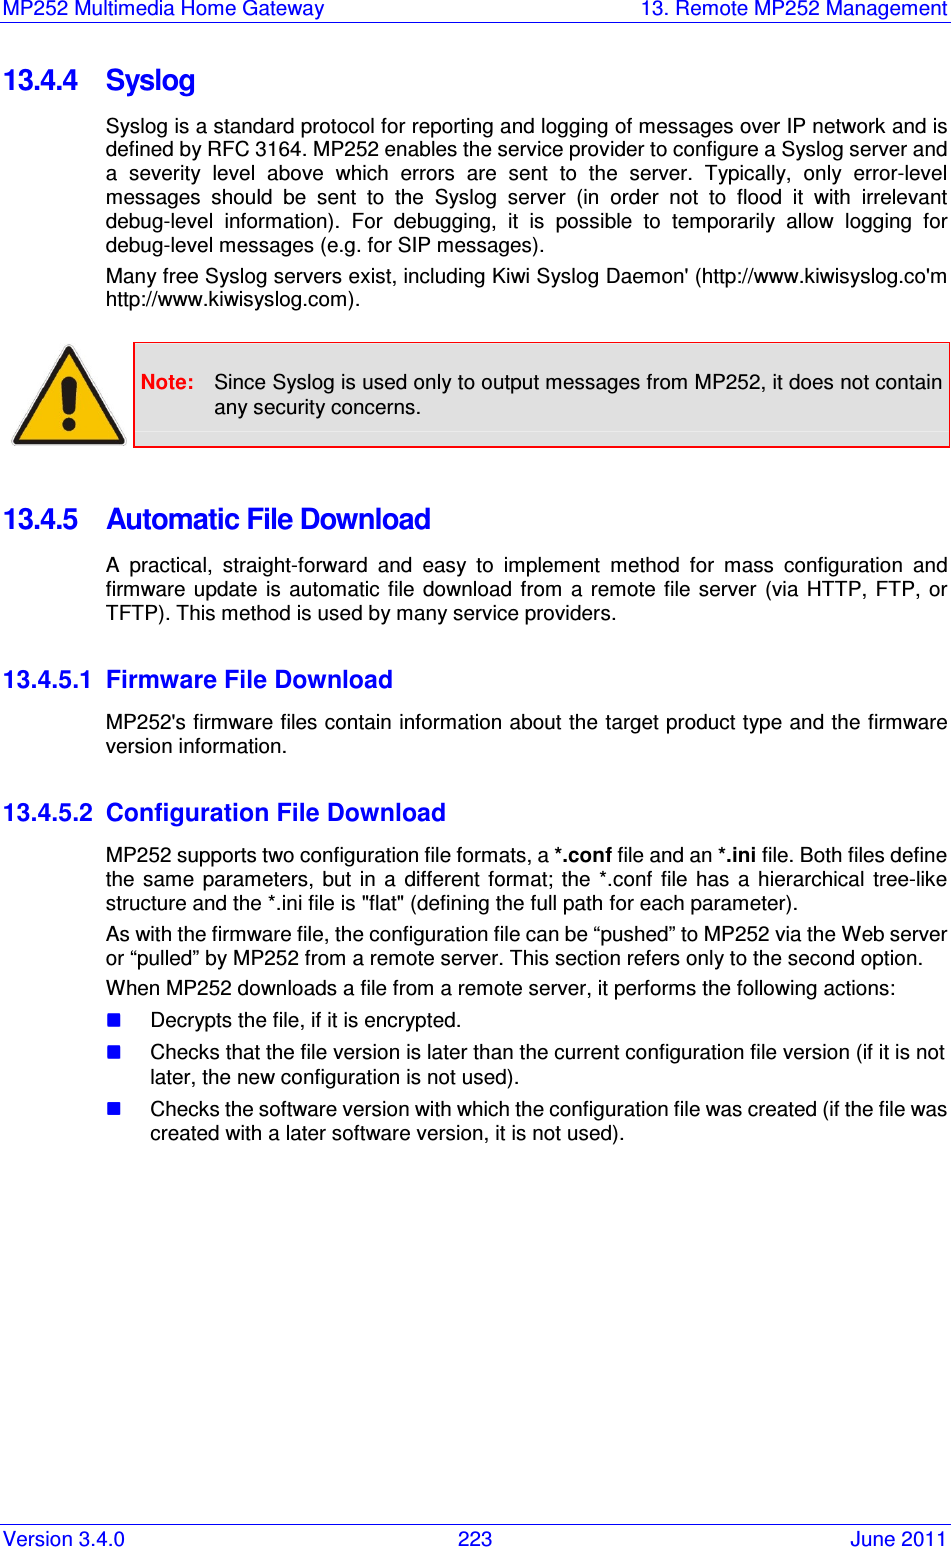 MP252 Multimedia Home Gateway  13. Remote MP252 Management Version 3.4.0  223  June 2011 13.4.4  Syslog Syslog is a standard protocol for reporting and logging of messages over IP network and is defined by RFC 3164. MP252 enables the service provider to configure a Syslog server and a  severity  level  above  which  errors  are  sent  to  the  server.  Typically,  only  error-level messages  should  be  sent  to  the  Syslog  server  (in  order  not  to  flood  it  with  irrelevant debug-level  information).  For  debugging,  it  is  possible  to  temporarily  allow  logging  for debug-level messages (e.g. for SIP messages). Many free Syslog servers exist, including Kiwi Syslog Daemon&apos; (http://www.kiwisyslog.co&apos;m http://www.kiwisyslog.com).   Note:  Since Syslog is used only to output messages from MP252, it does not contain any security concerns.  13.4.5  Automatic File Download A  practical,  straight-forward  and  easy  to  implement  method  for  mass  configuration  and firmware  update  is automatic  file  download from  a  remote file  server  (via  HTTP,  FTP,  or TFTP). This method is used by many service providers.  13.4.5.1  Firmware File Download MP252&apos;s firmware files contain information about the target product type and the firmware version information.  13.4.5.2  Configuration File Download MP252 supports two configuration file formats, a *.conf file and an *.ini file. Both files define the  same  parameters,  but  in  a  different format;  the  *.conf  file  has  a  hierarchical  tree-like structure and the *.ini file is &quot;flat&quot; (defining the full path for each parameter). As with the firmware file, the configuration file can be “pushed” to MP252 via the Web server or “pulled” by MP252 from a remote server. This section refers only to the second option. When MP252 downloads a file from a remote server, it performs the following actions:  Decrypts the file, if it is encrypted.  Checks that the file version is later than the current configuration file version (if it is not later, the new configuration is not used).  Checks the software version with which the configuration file was created (if the file was created with a later software version, it is not used). 